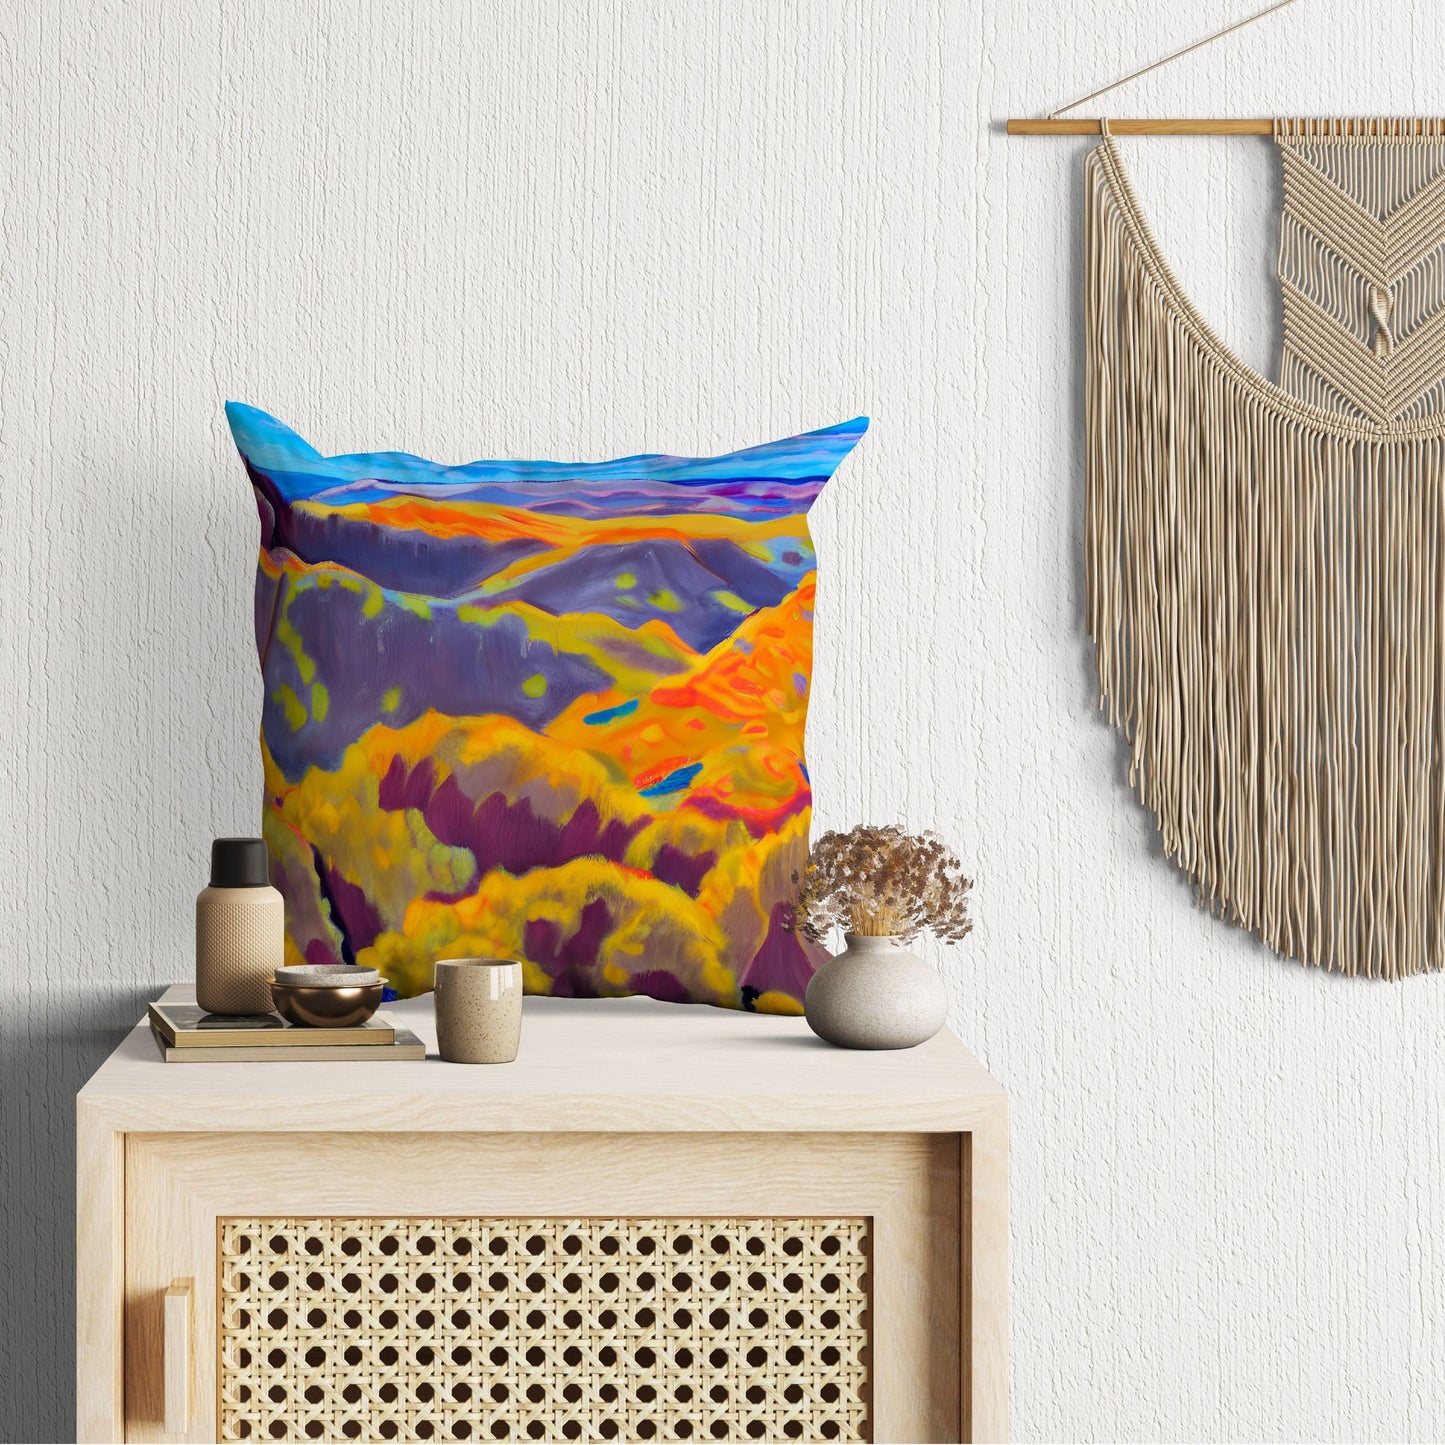 Landscape With Mountains, Pillow Case, Abstract Throw Pillow, Artist Pillow, Fashion, Square Pillow, Farmhouse Pillow, Indoor Pillow Cases